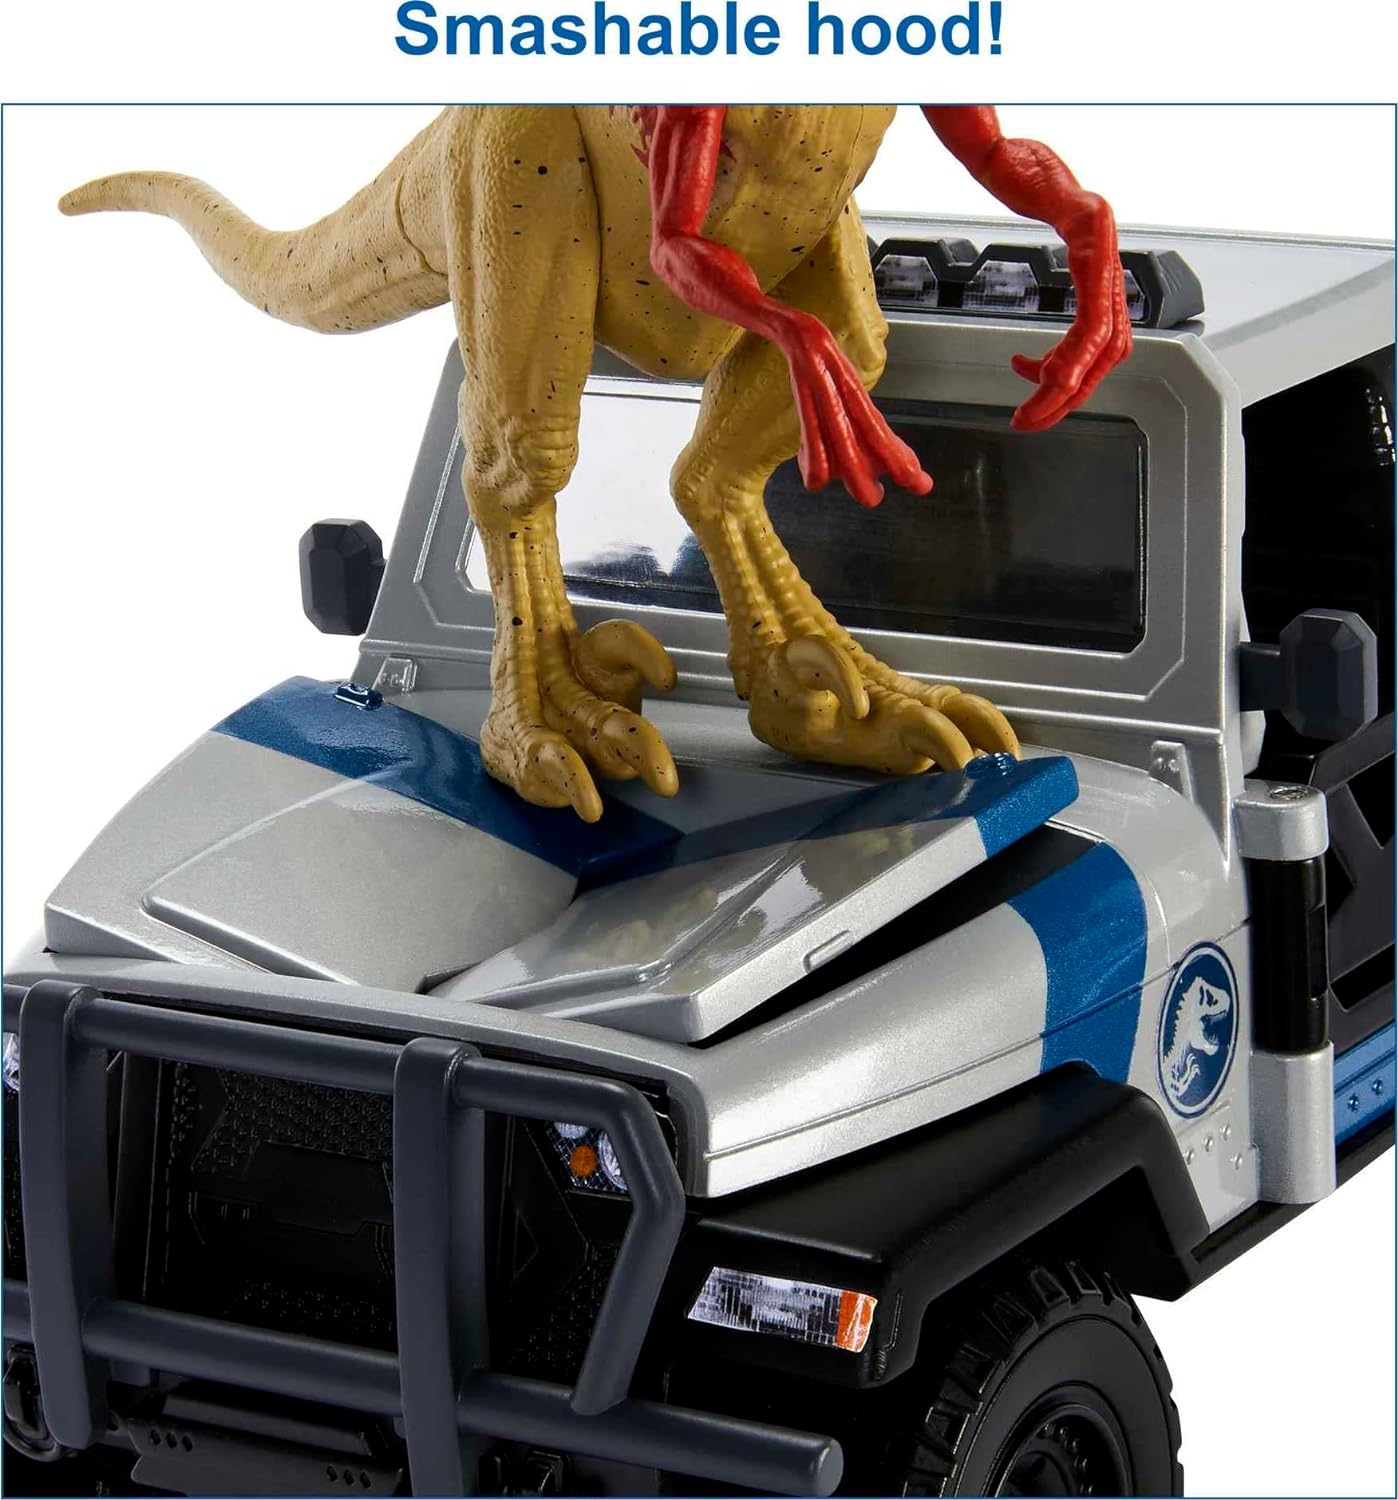 Mattel Jurassic World Toys Search 'N Smash Truck Set with Atrociraptor Dinosaur & Human Action Figure, Vehicle with Destruct Features